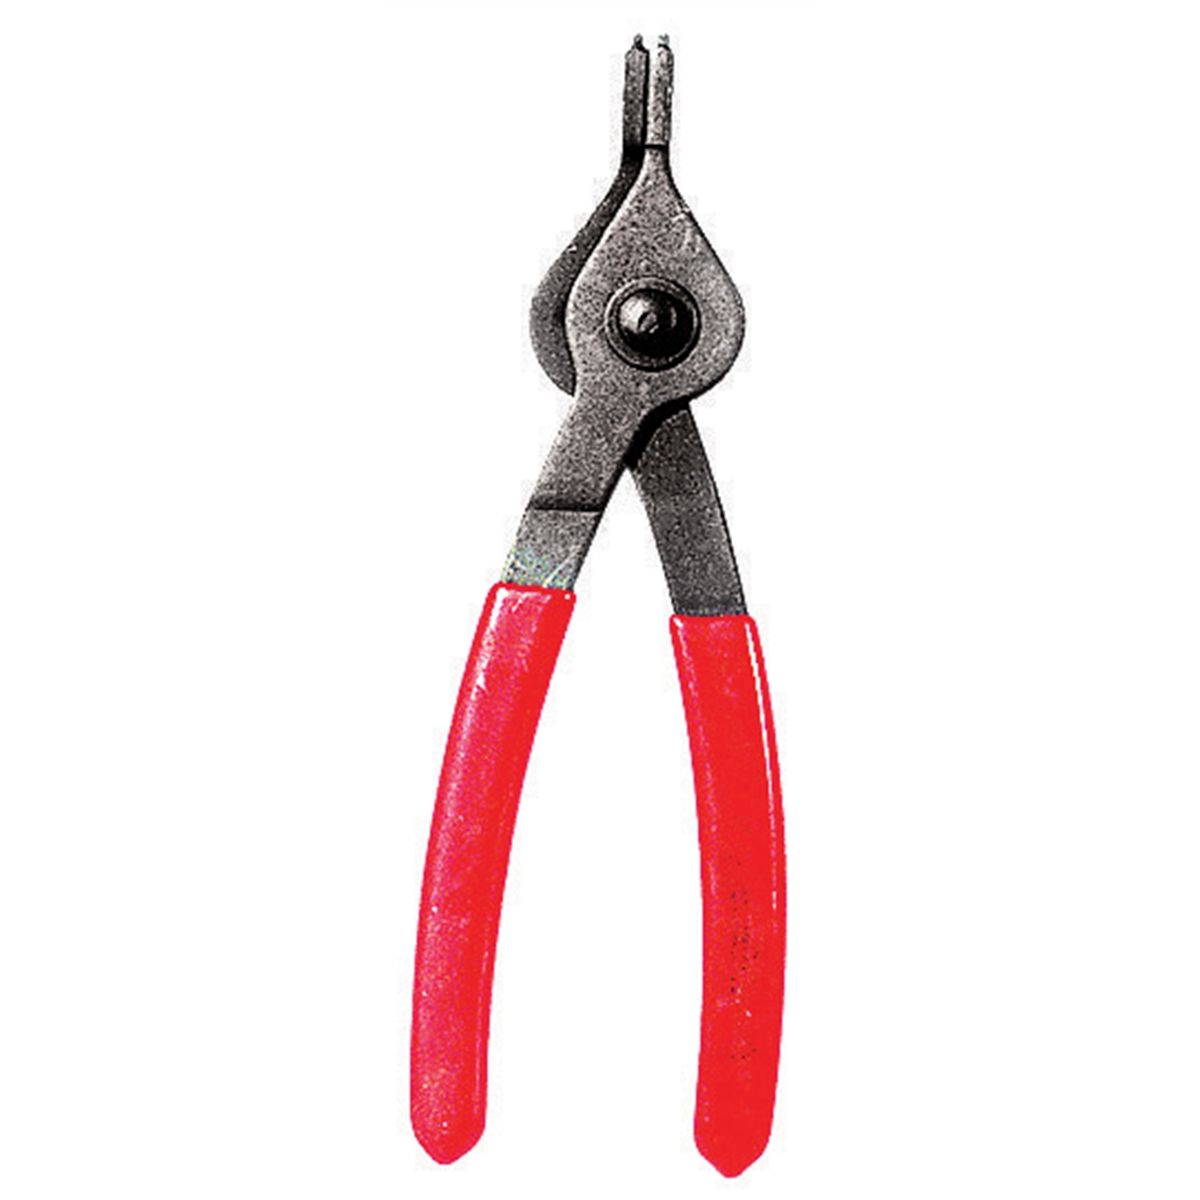 Straight Reversible Snap Ring Plier - Large Tip